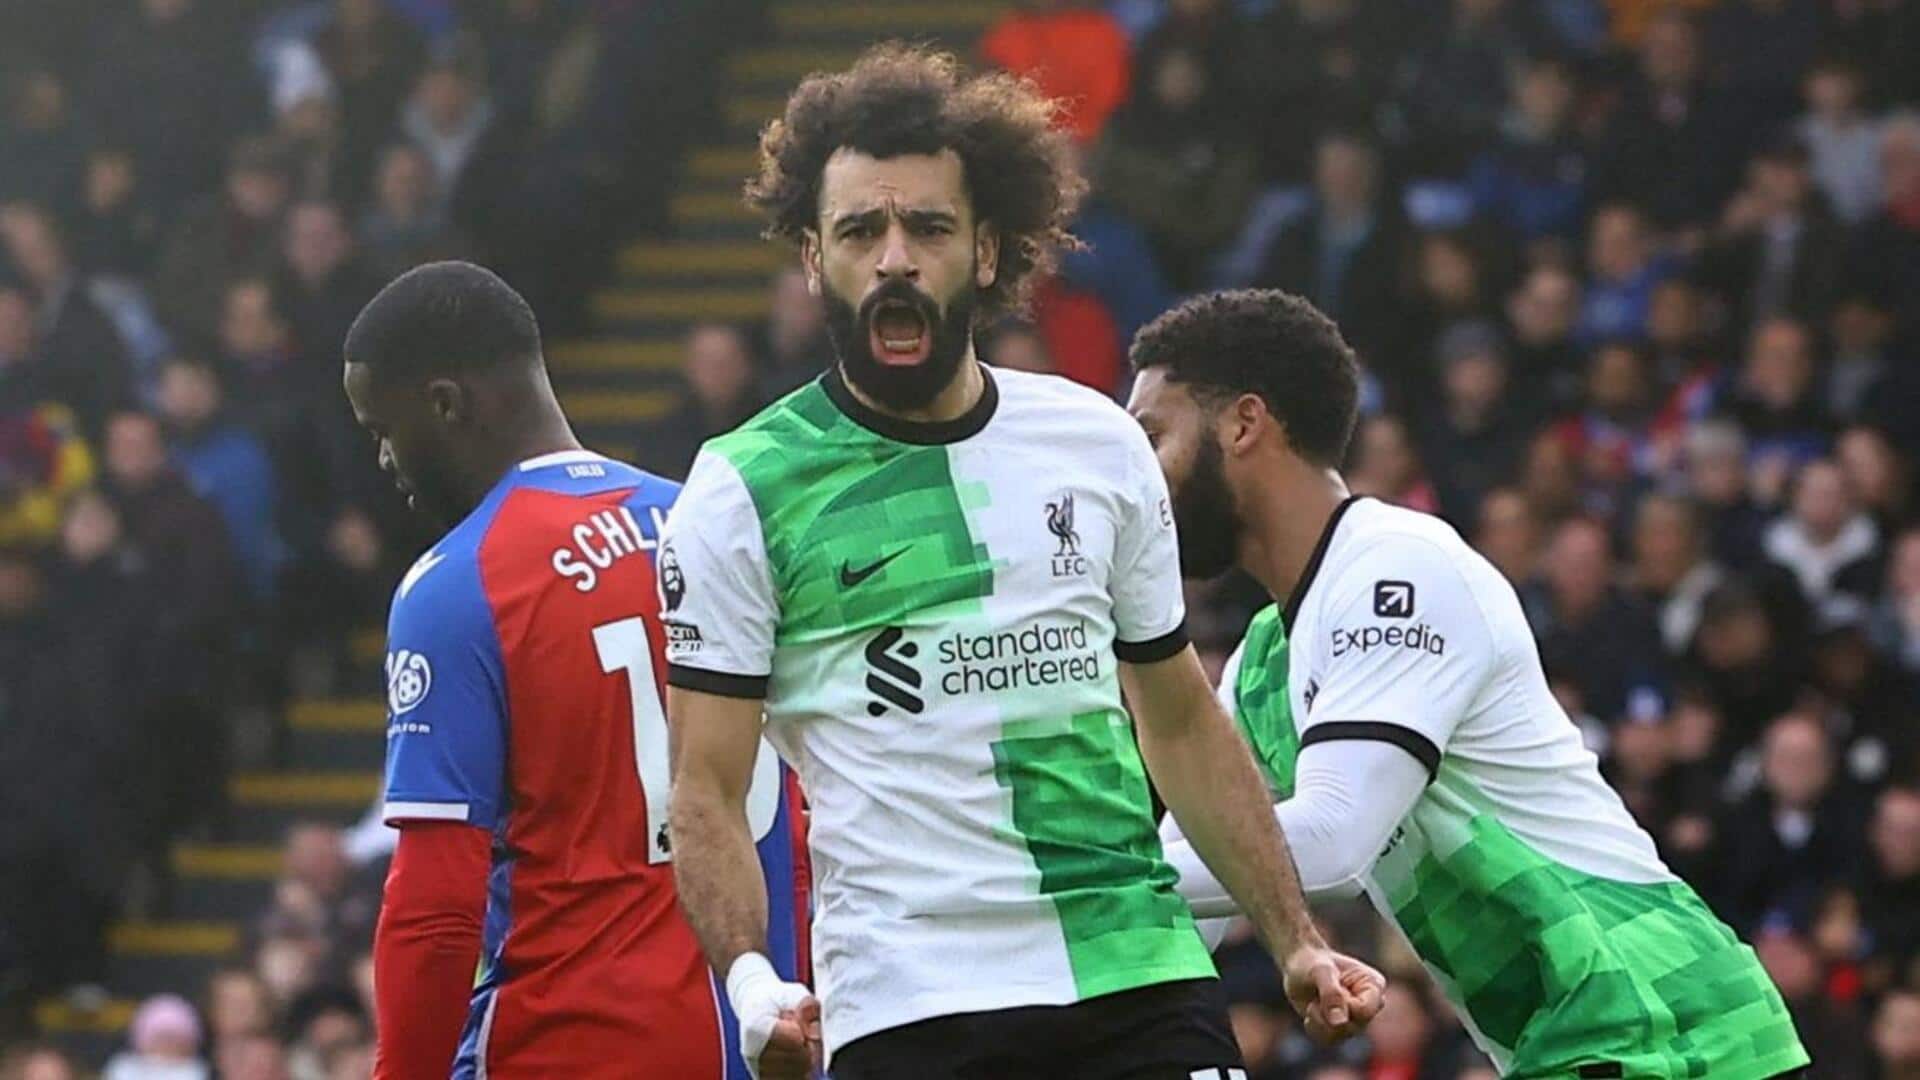 Mohamed Salah races to 200 goals for Liverpool: Key stats